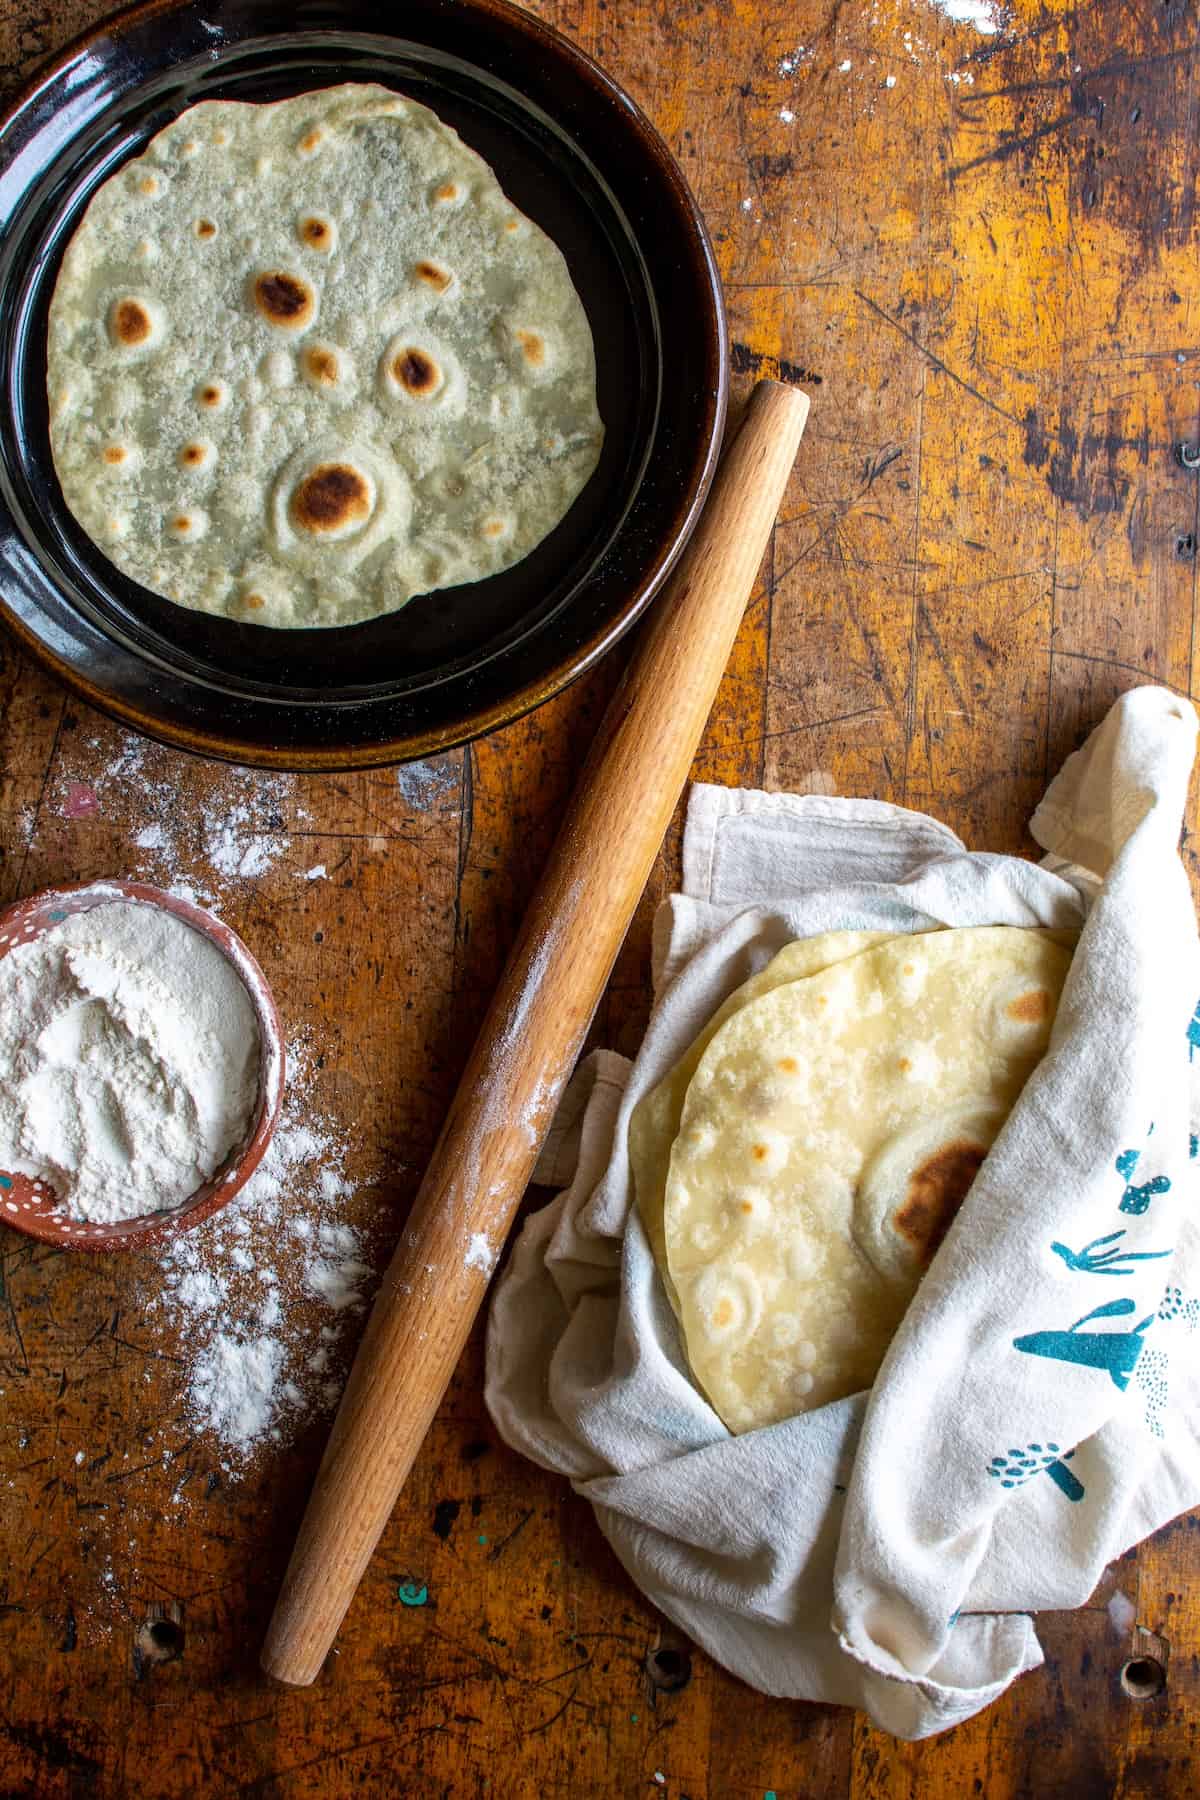 A stack of flour tortillas wrapped in a towel with a rolling pin next to it.